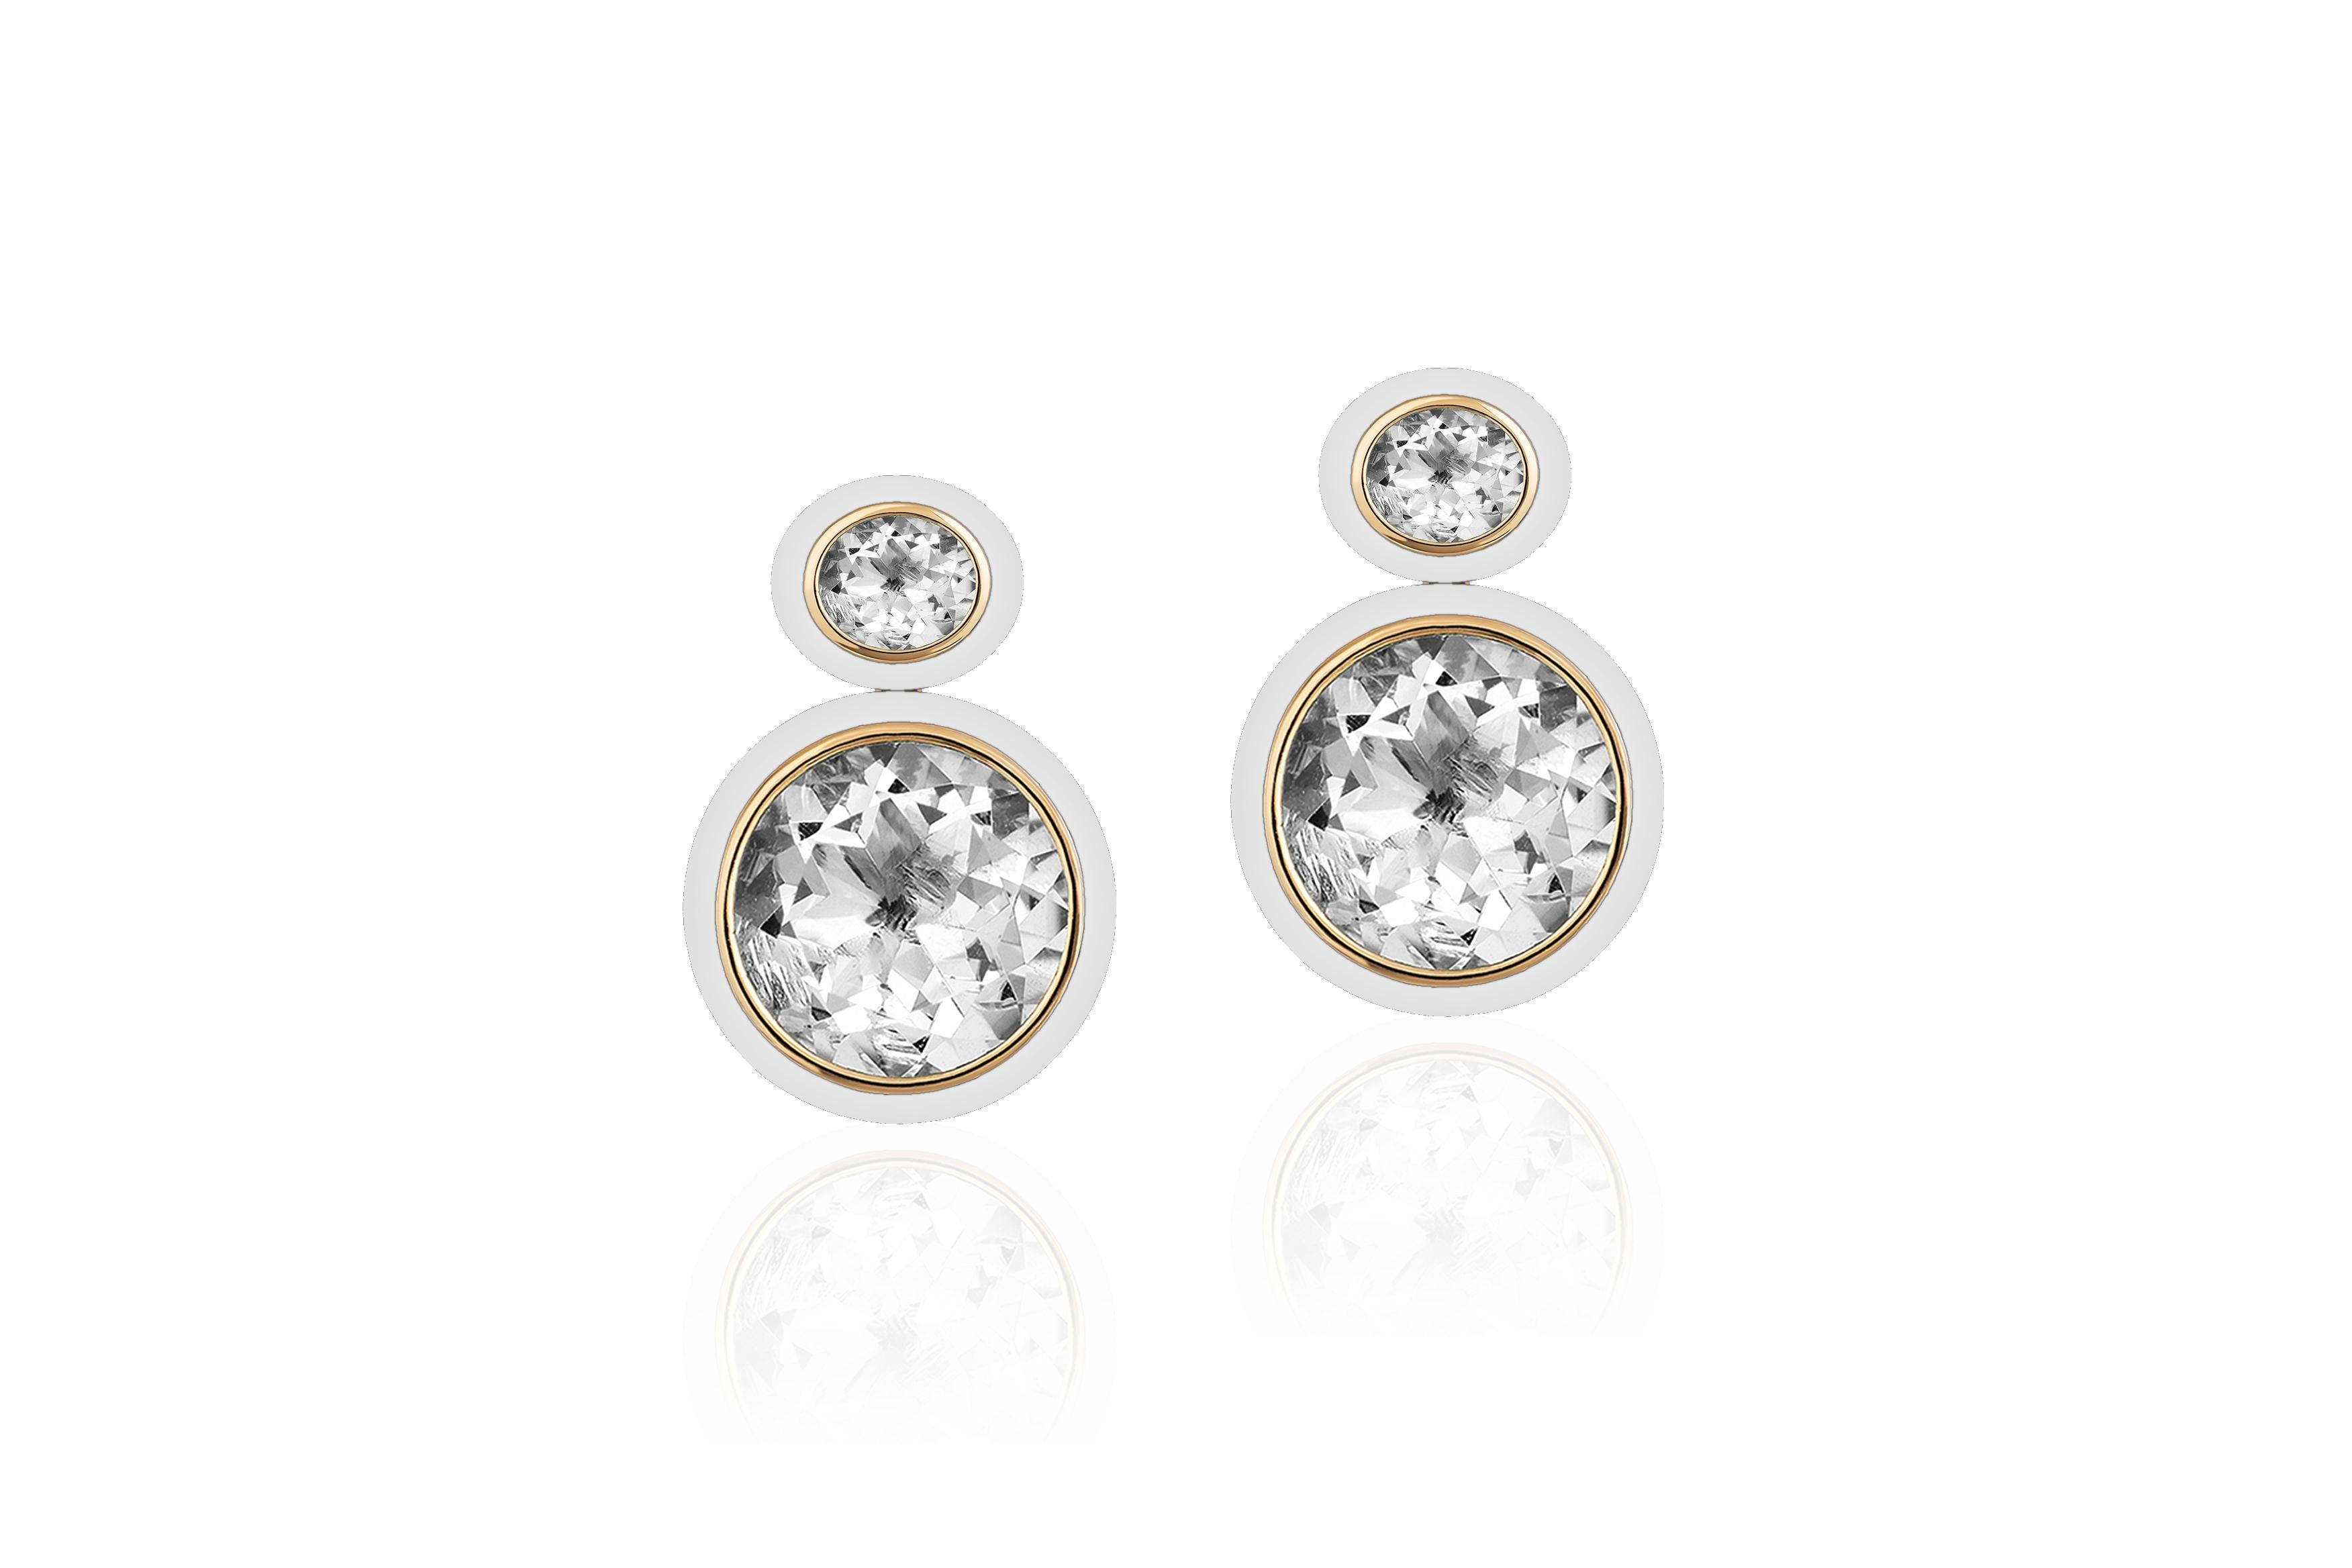 These Oval Shape Rock Crystal and White Agate Earrings in 18K Yellow Gold from the 'Melange' Collection are a stunning piece of jewelry. The earrings feature two oval-shaped Rock Crystal gemstones with a White Agate Border- set in a rich 18K yellow